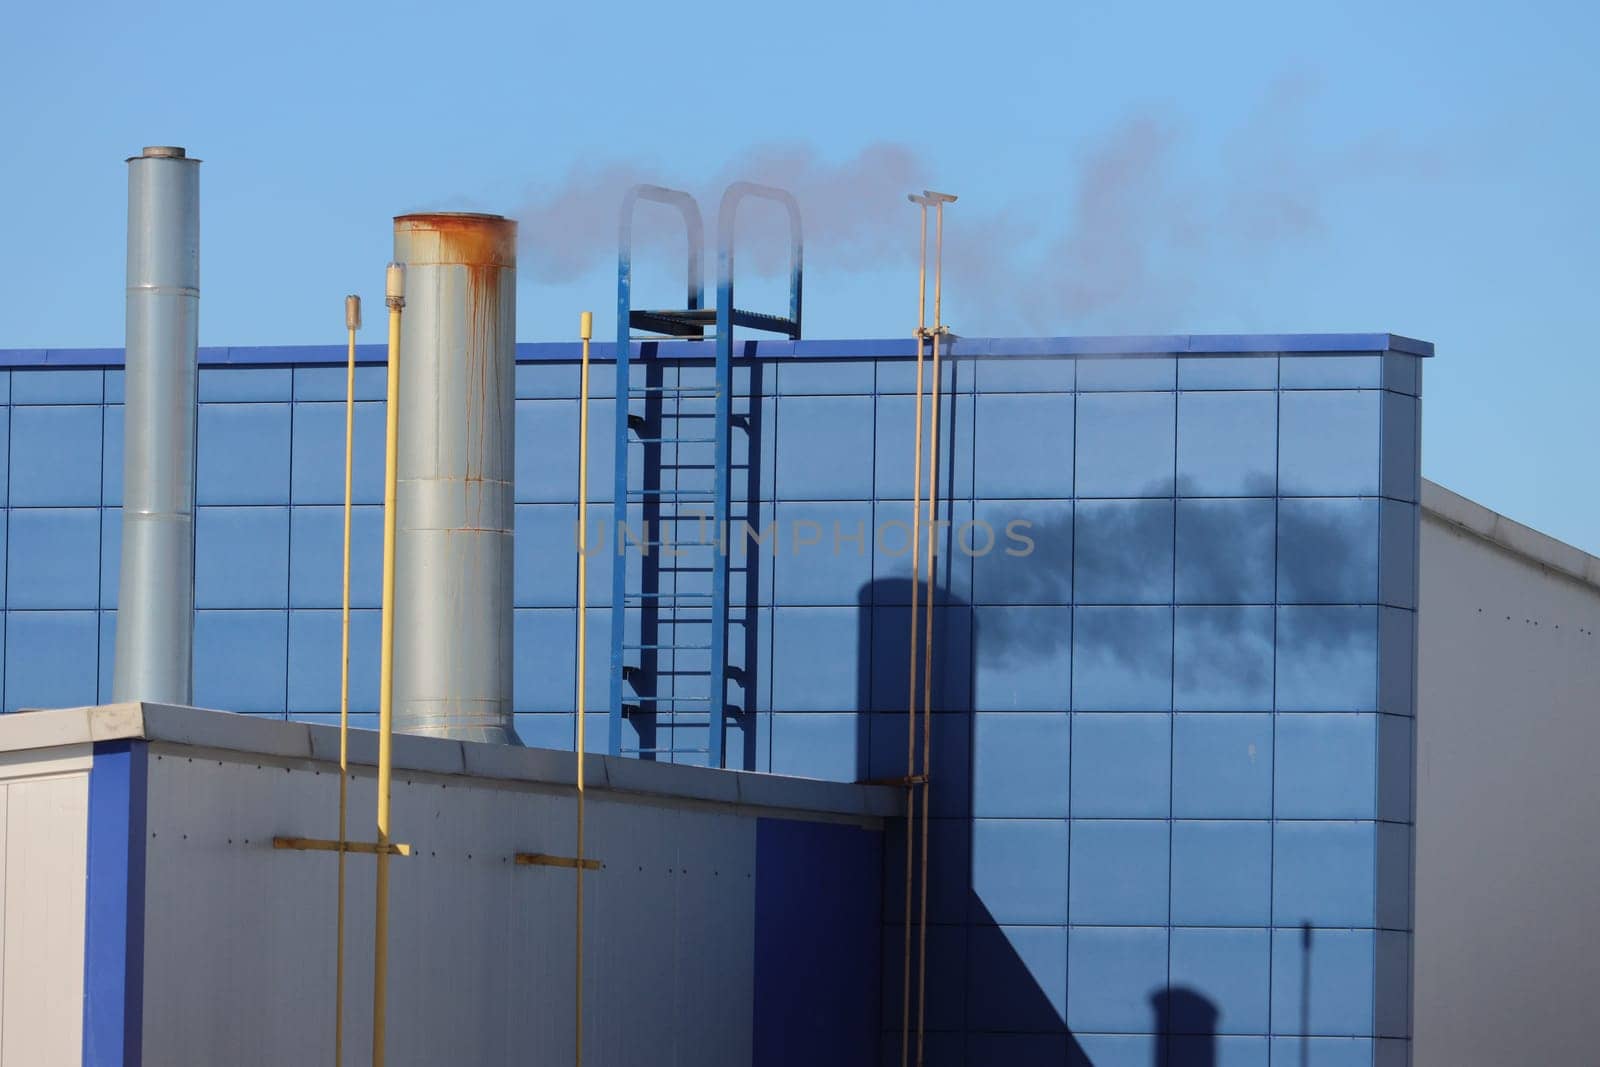 Industrial chimney, low angle view. Chimney with smoke, stairs, wall, building facade in blue.